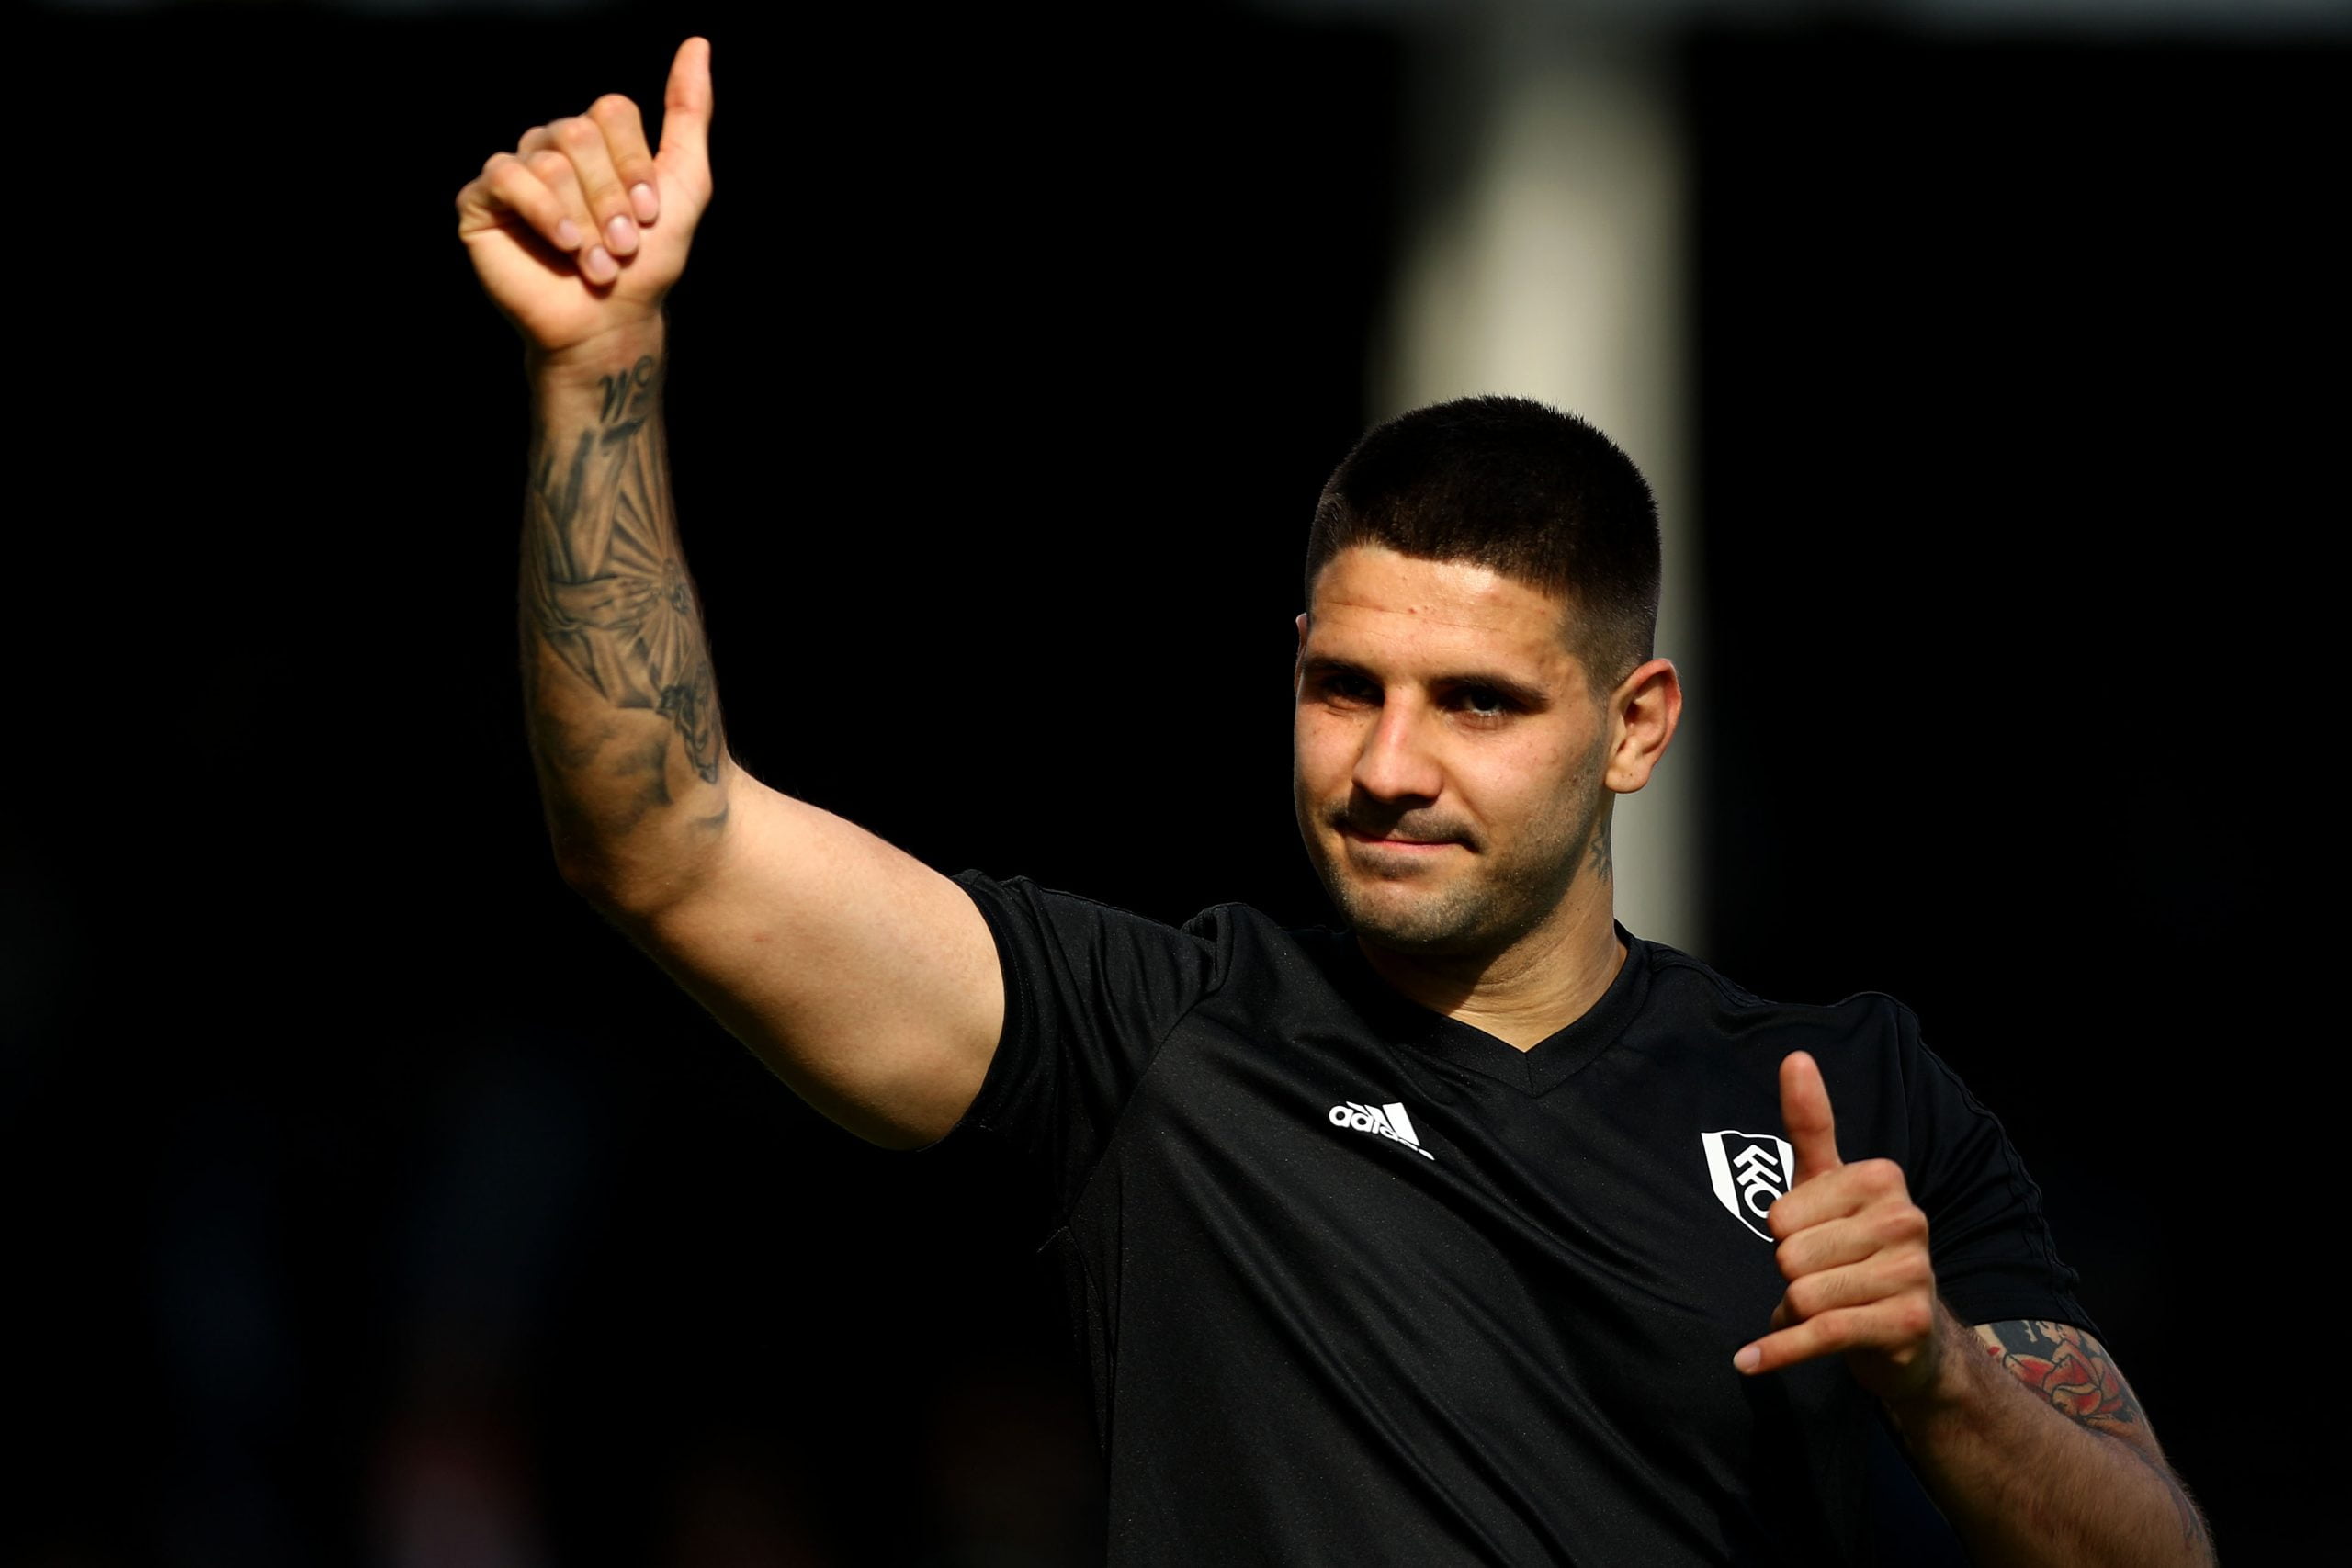 LONDON, ENGLAND - MAY 12: Aleksandar Mitrovic of Fulham waves to the fans at the end of the Premier League match between Fulham FC and Newcastle United at Craven Cottage on May 12, 2019 in London, United Kingdom. (Photo by Clive Rose/Getty Images)